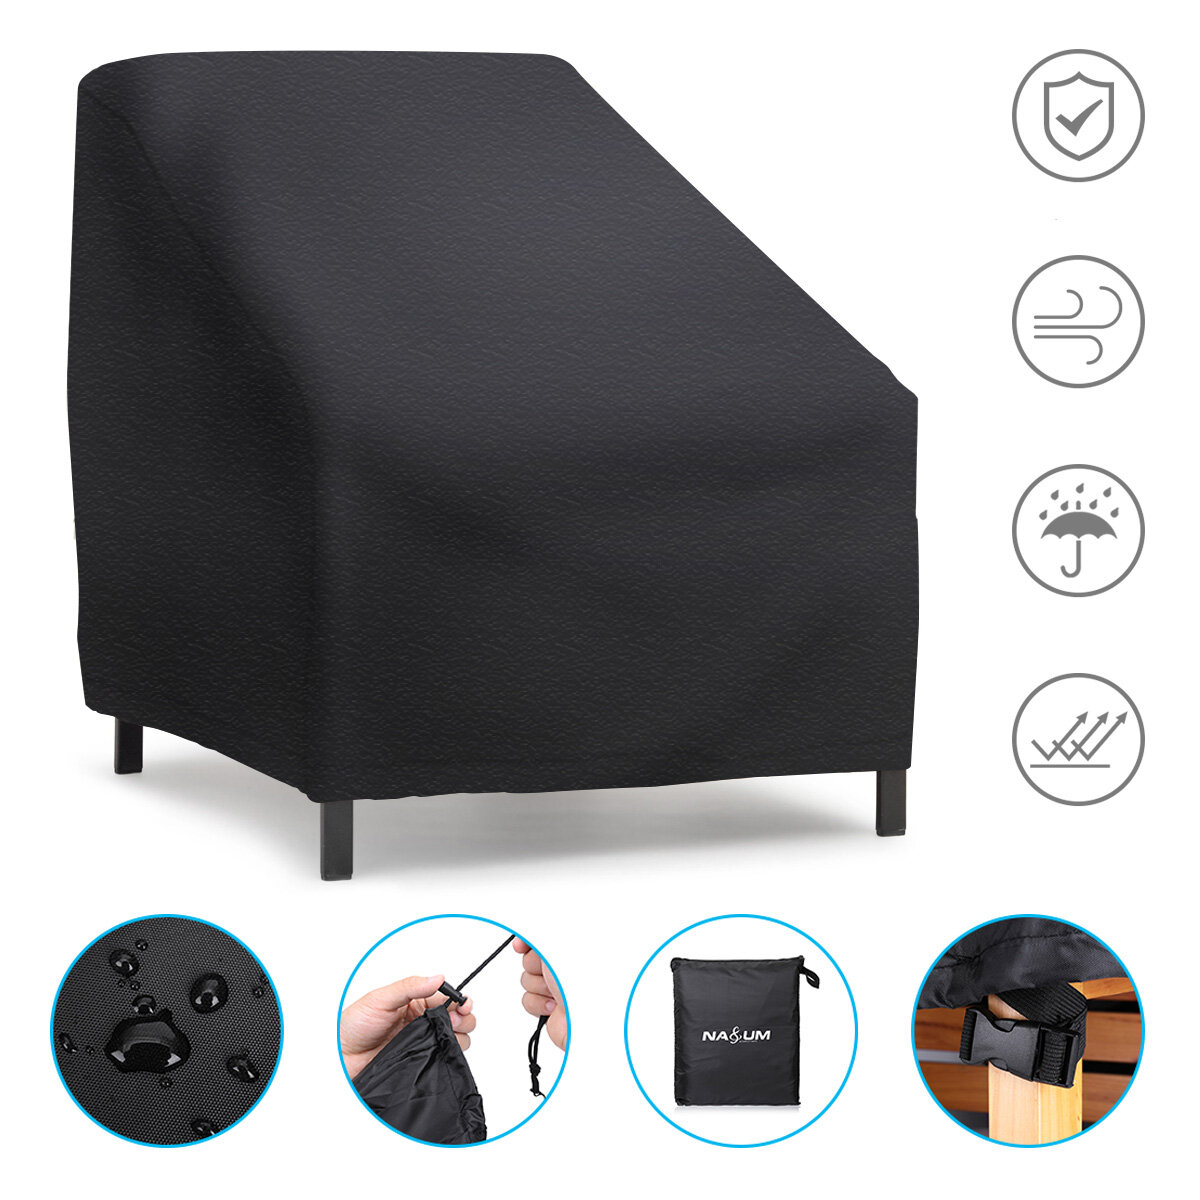 54x38x29'' Furniture Large Patio Seat Cover Waterproof Anti-UV Dustproof Durable Table Chair Cover Lounge Deep Chair Cov